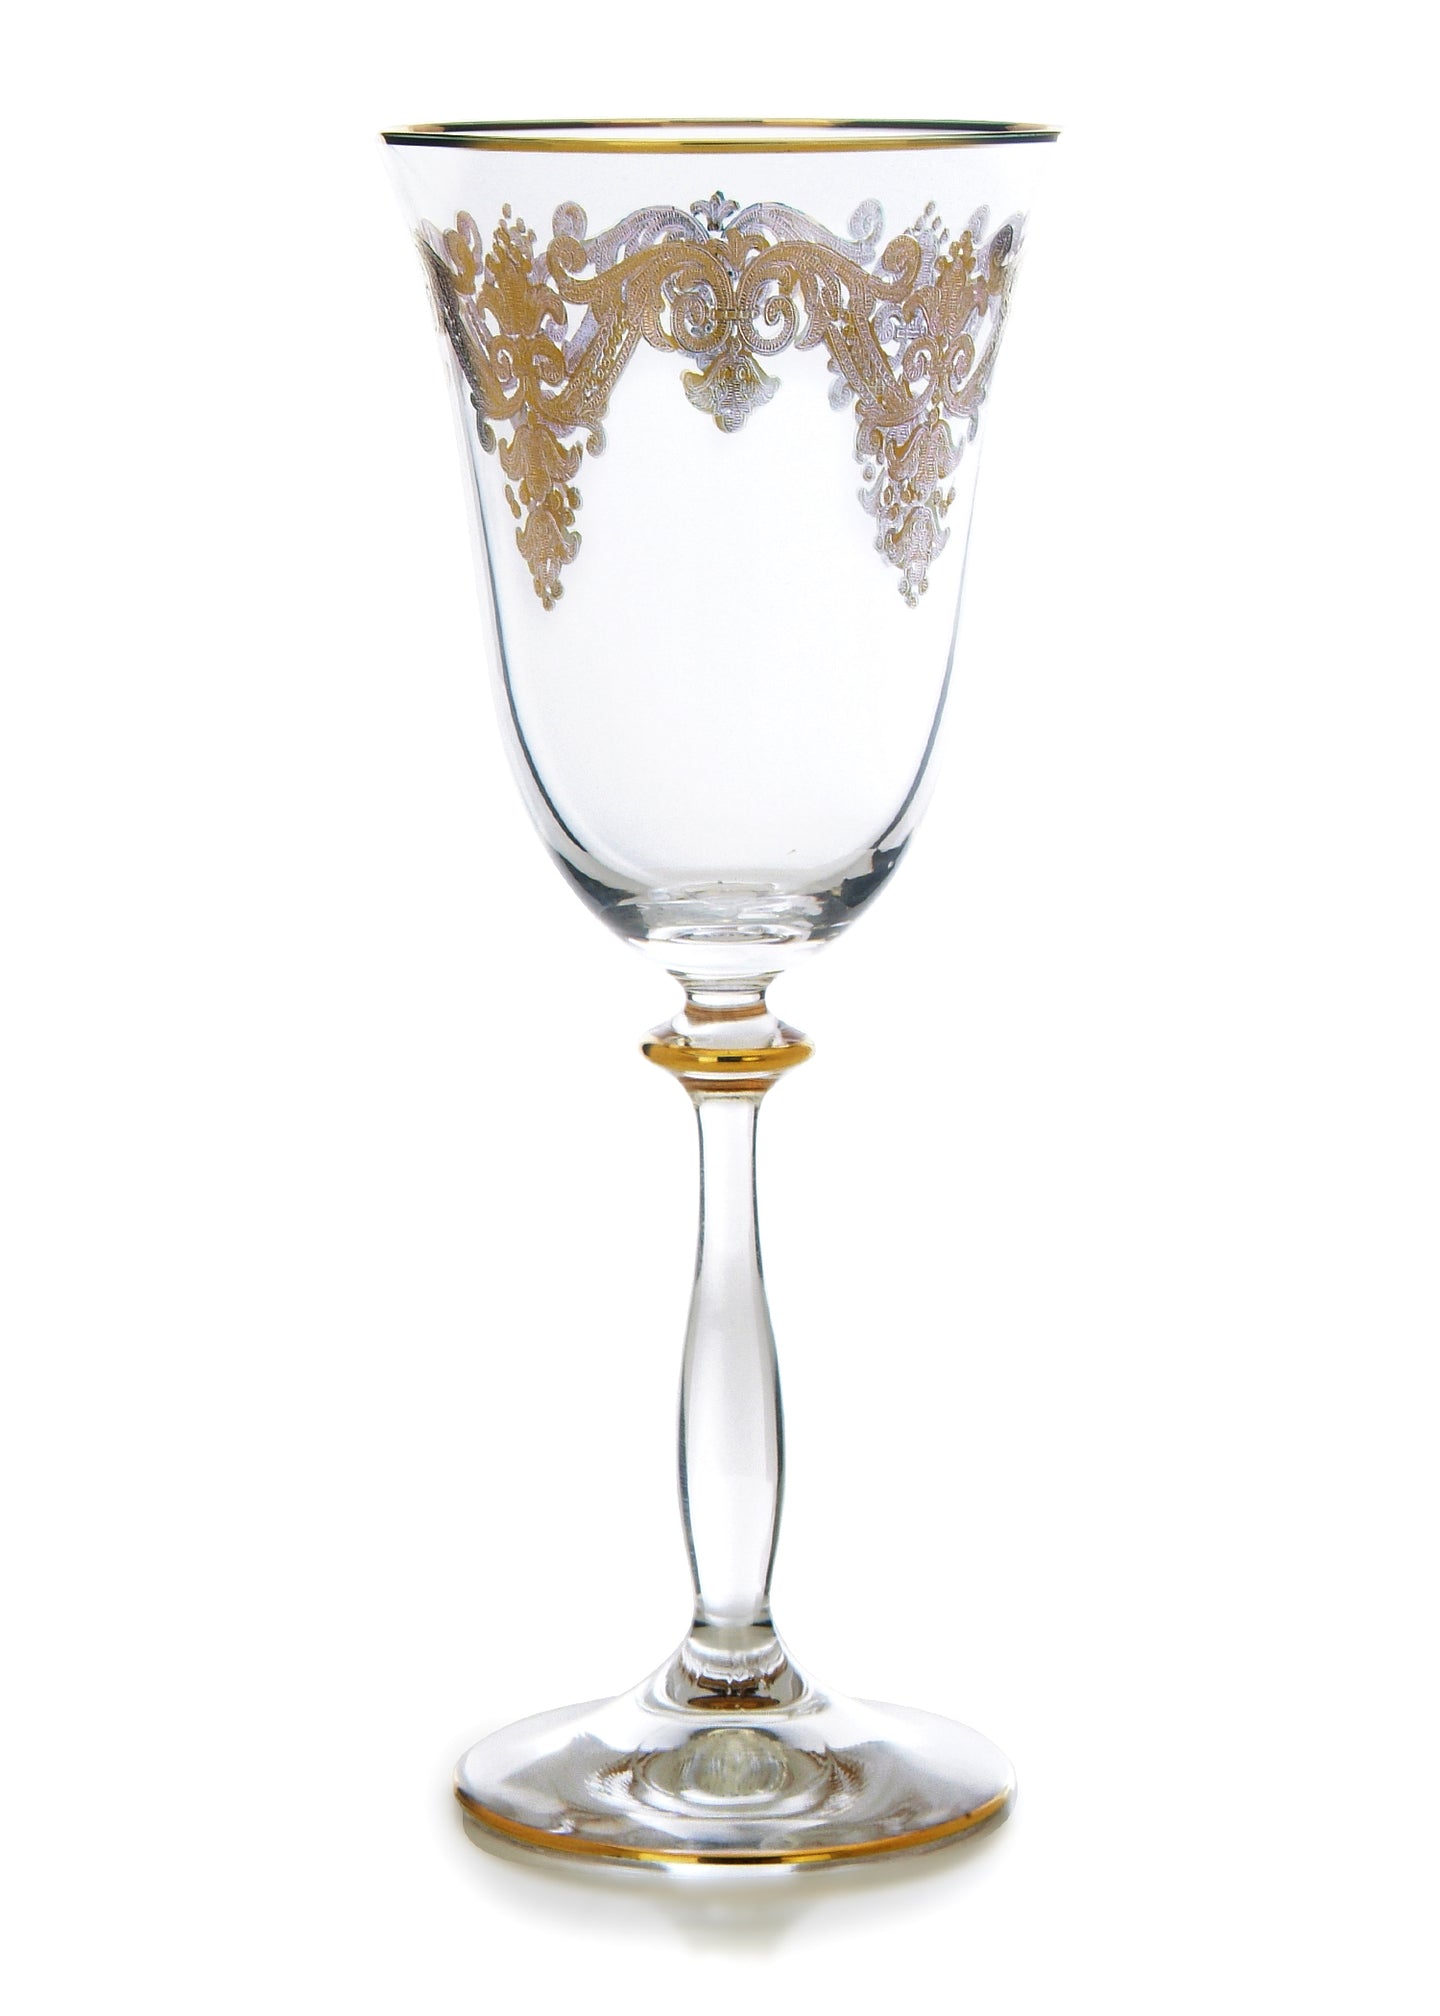 Set of 6 Water Glasses with 24k Gold Artwork